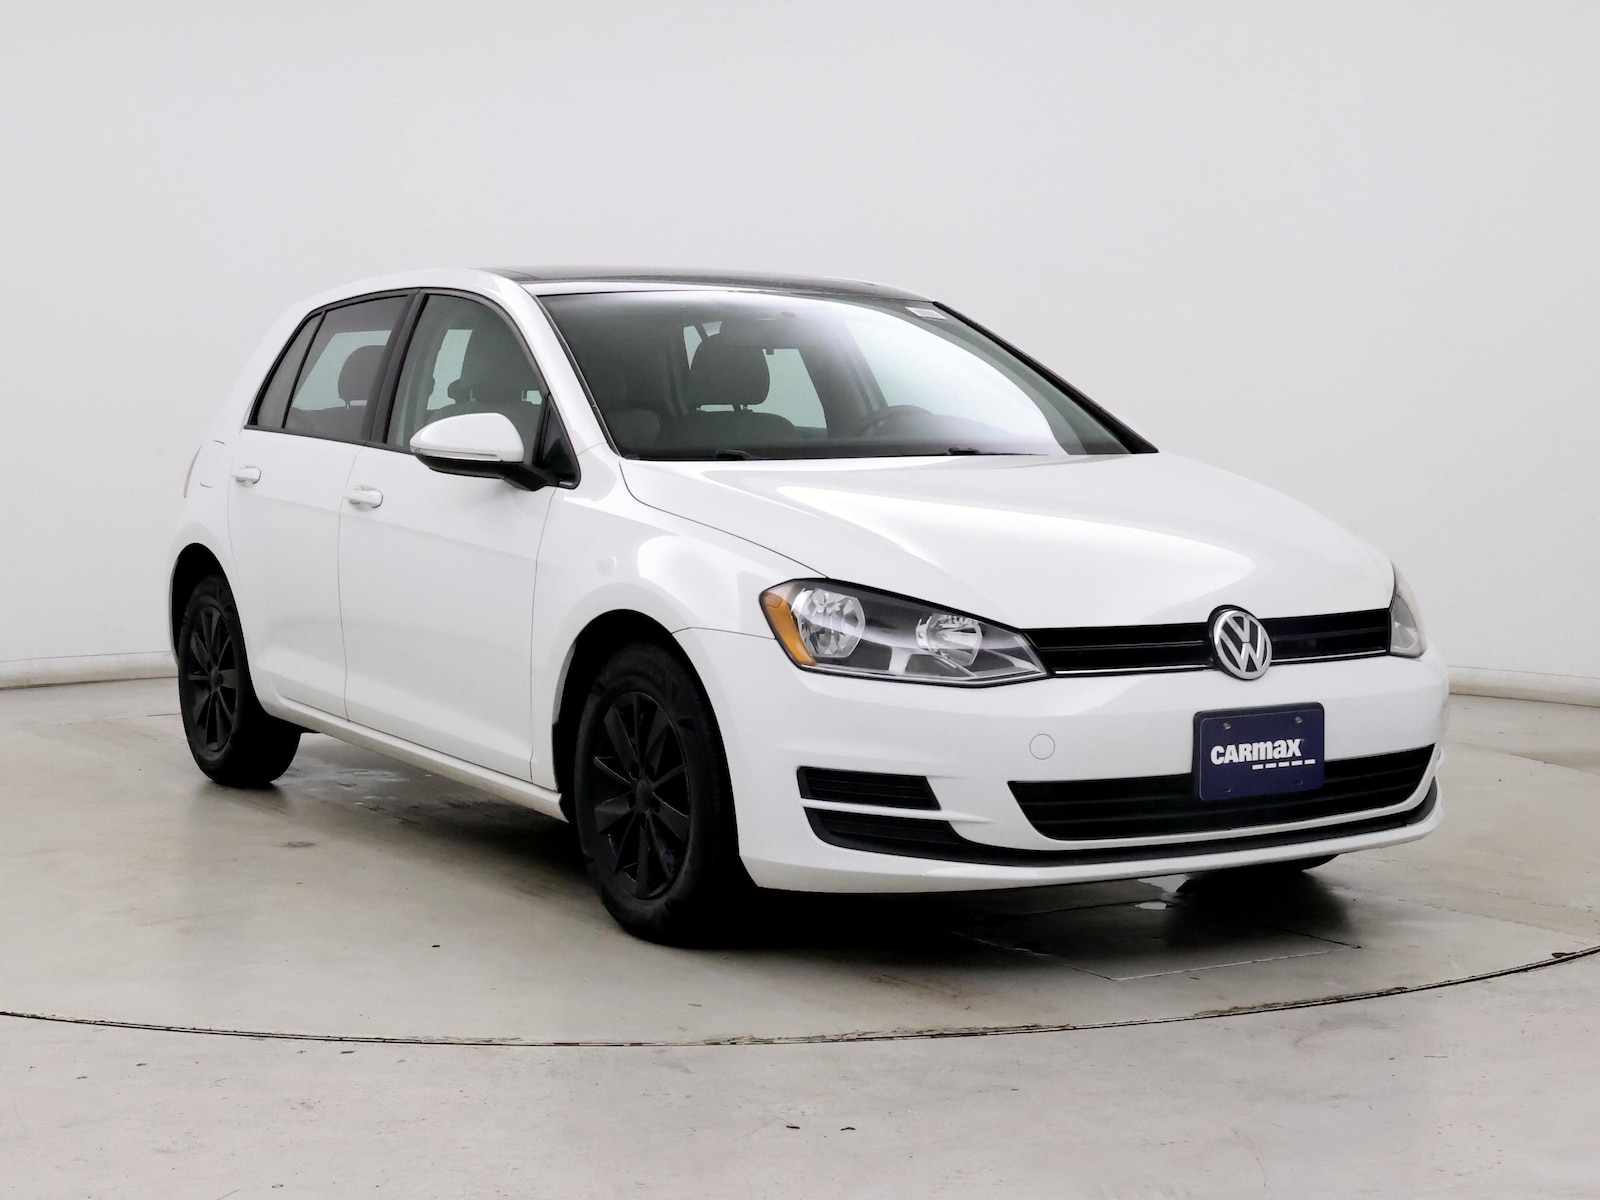 Used 2016 Volkswagen Golf TSI S with VIN 3VW217AU1GM050815 for sale in Kenosha, WI